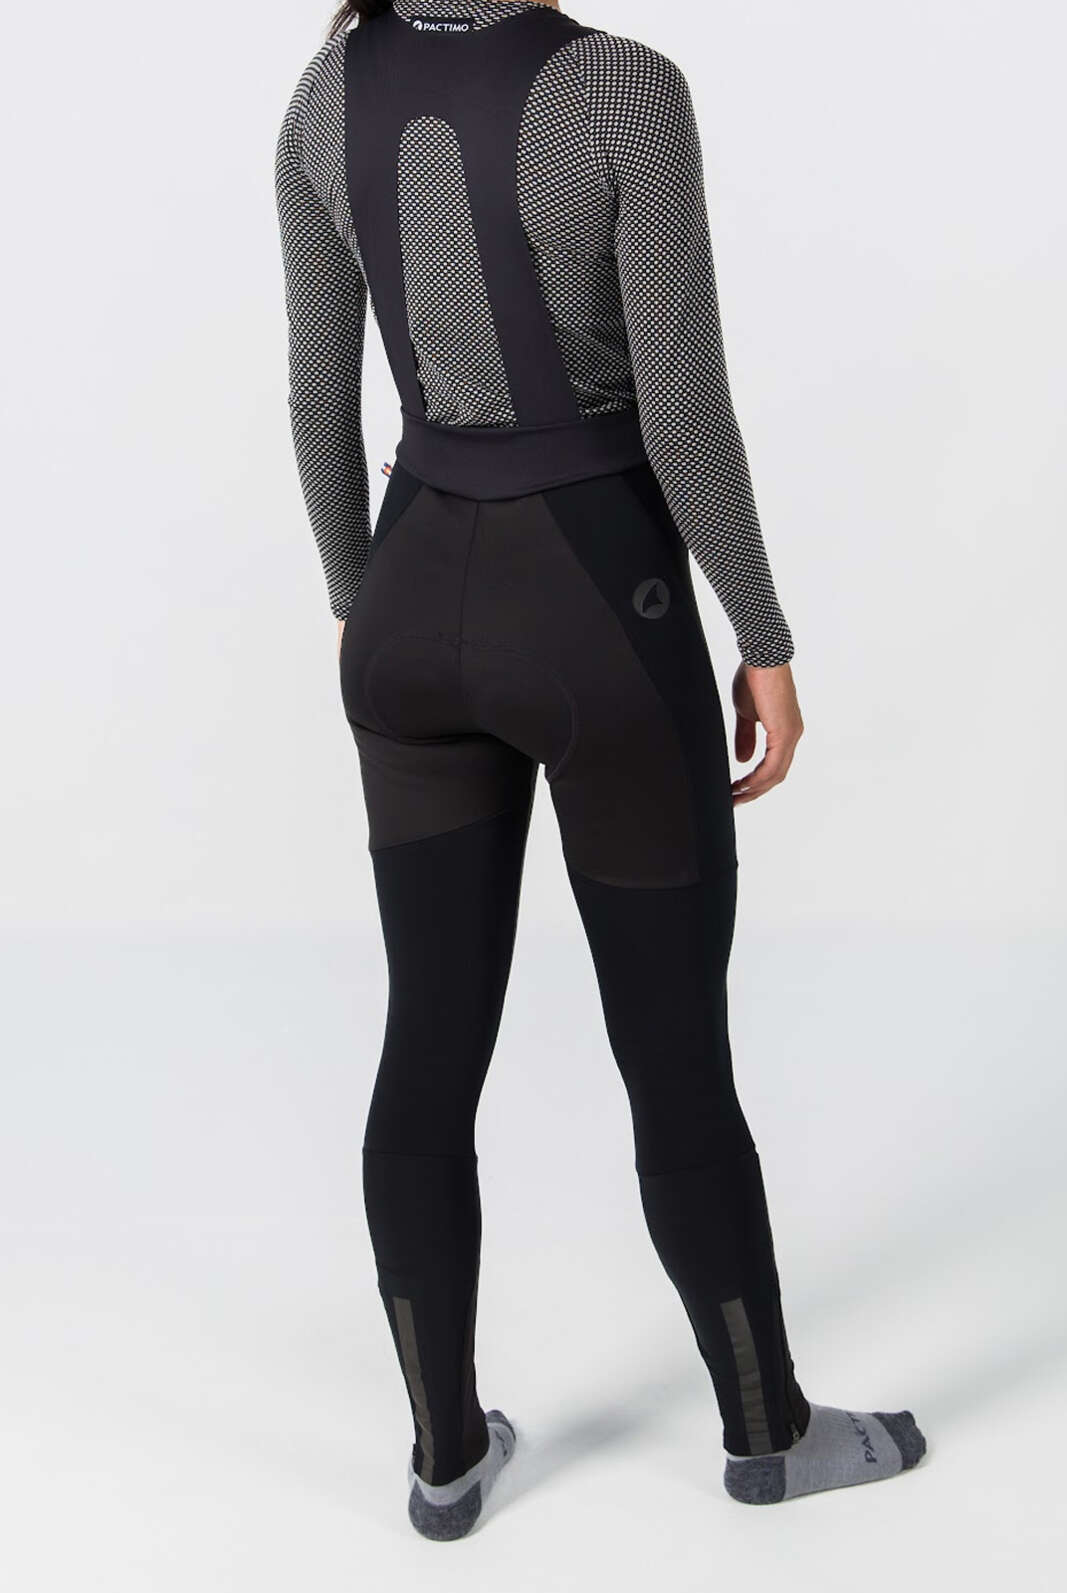 Women's Winter Cycling Tights, Wind & Water-Resistant